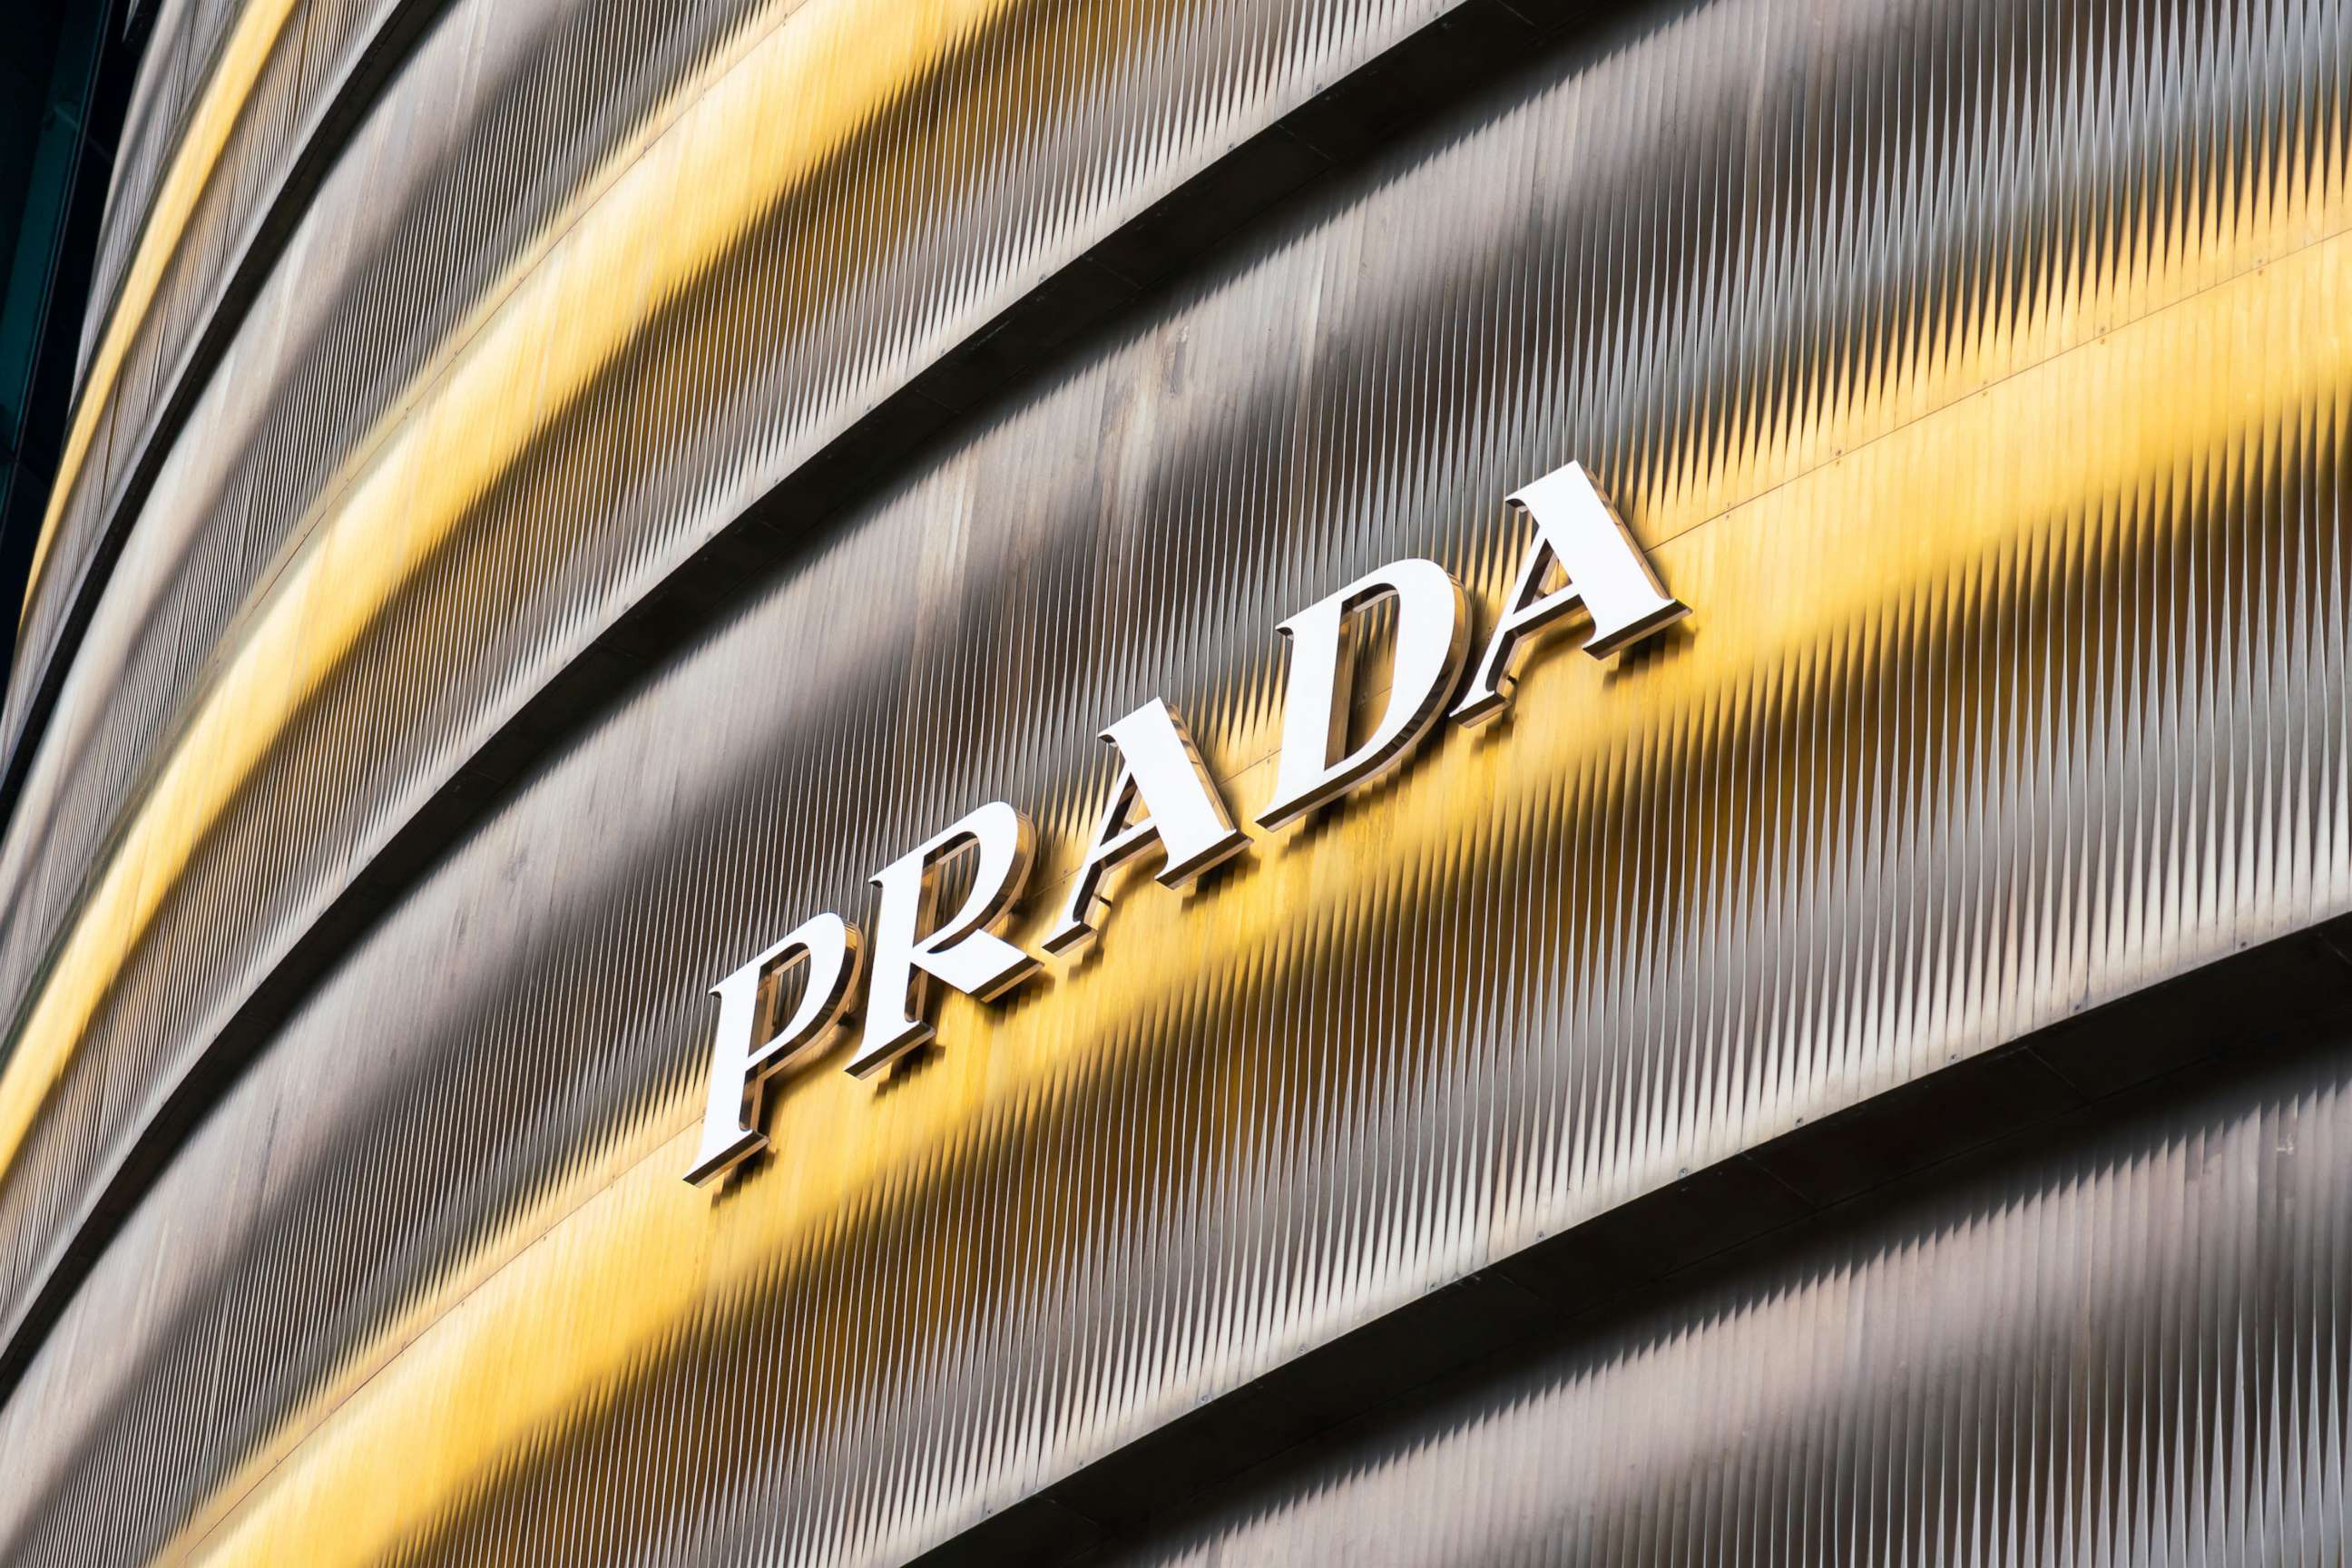 PHOTO: The Prada logo is pictured, July 20, 2019.